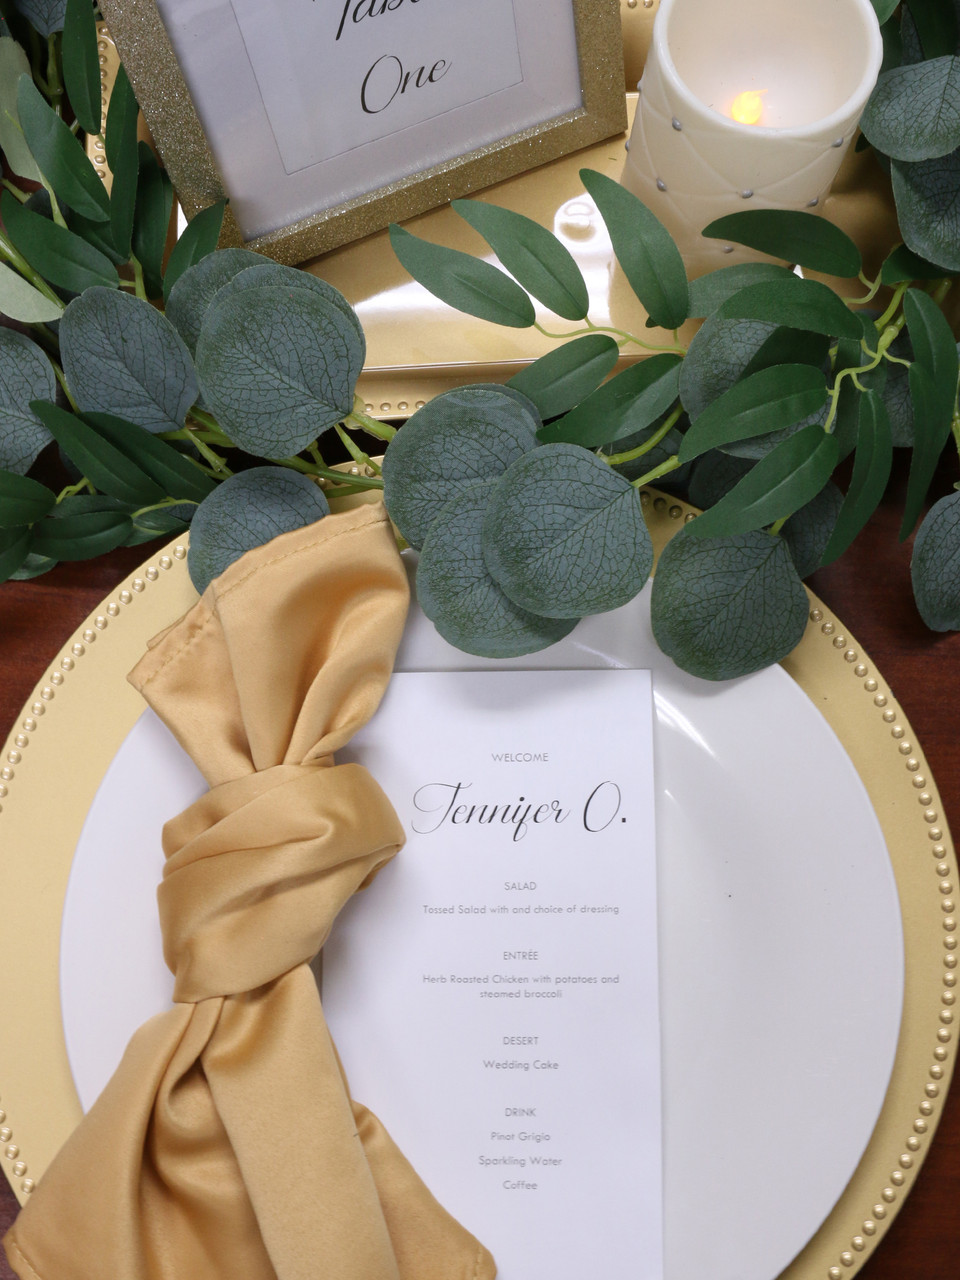 https://cdn11.bigcommerce.com/s-bch7e9/images/stencil/1280x1280/products/591/10856/20-inch-gold-lamour-satin-napkins-for-weddings-2__43384.1692649895.jpg?c=2